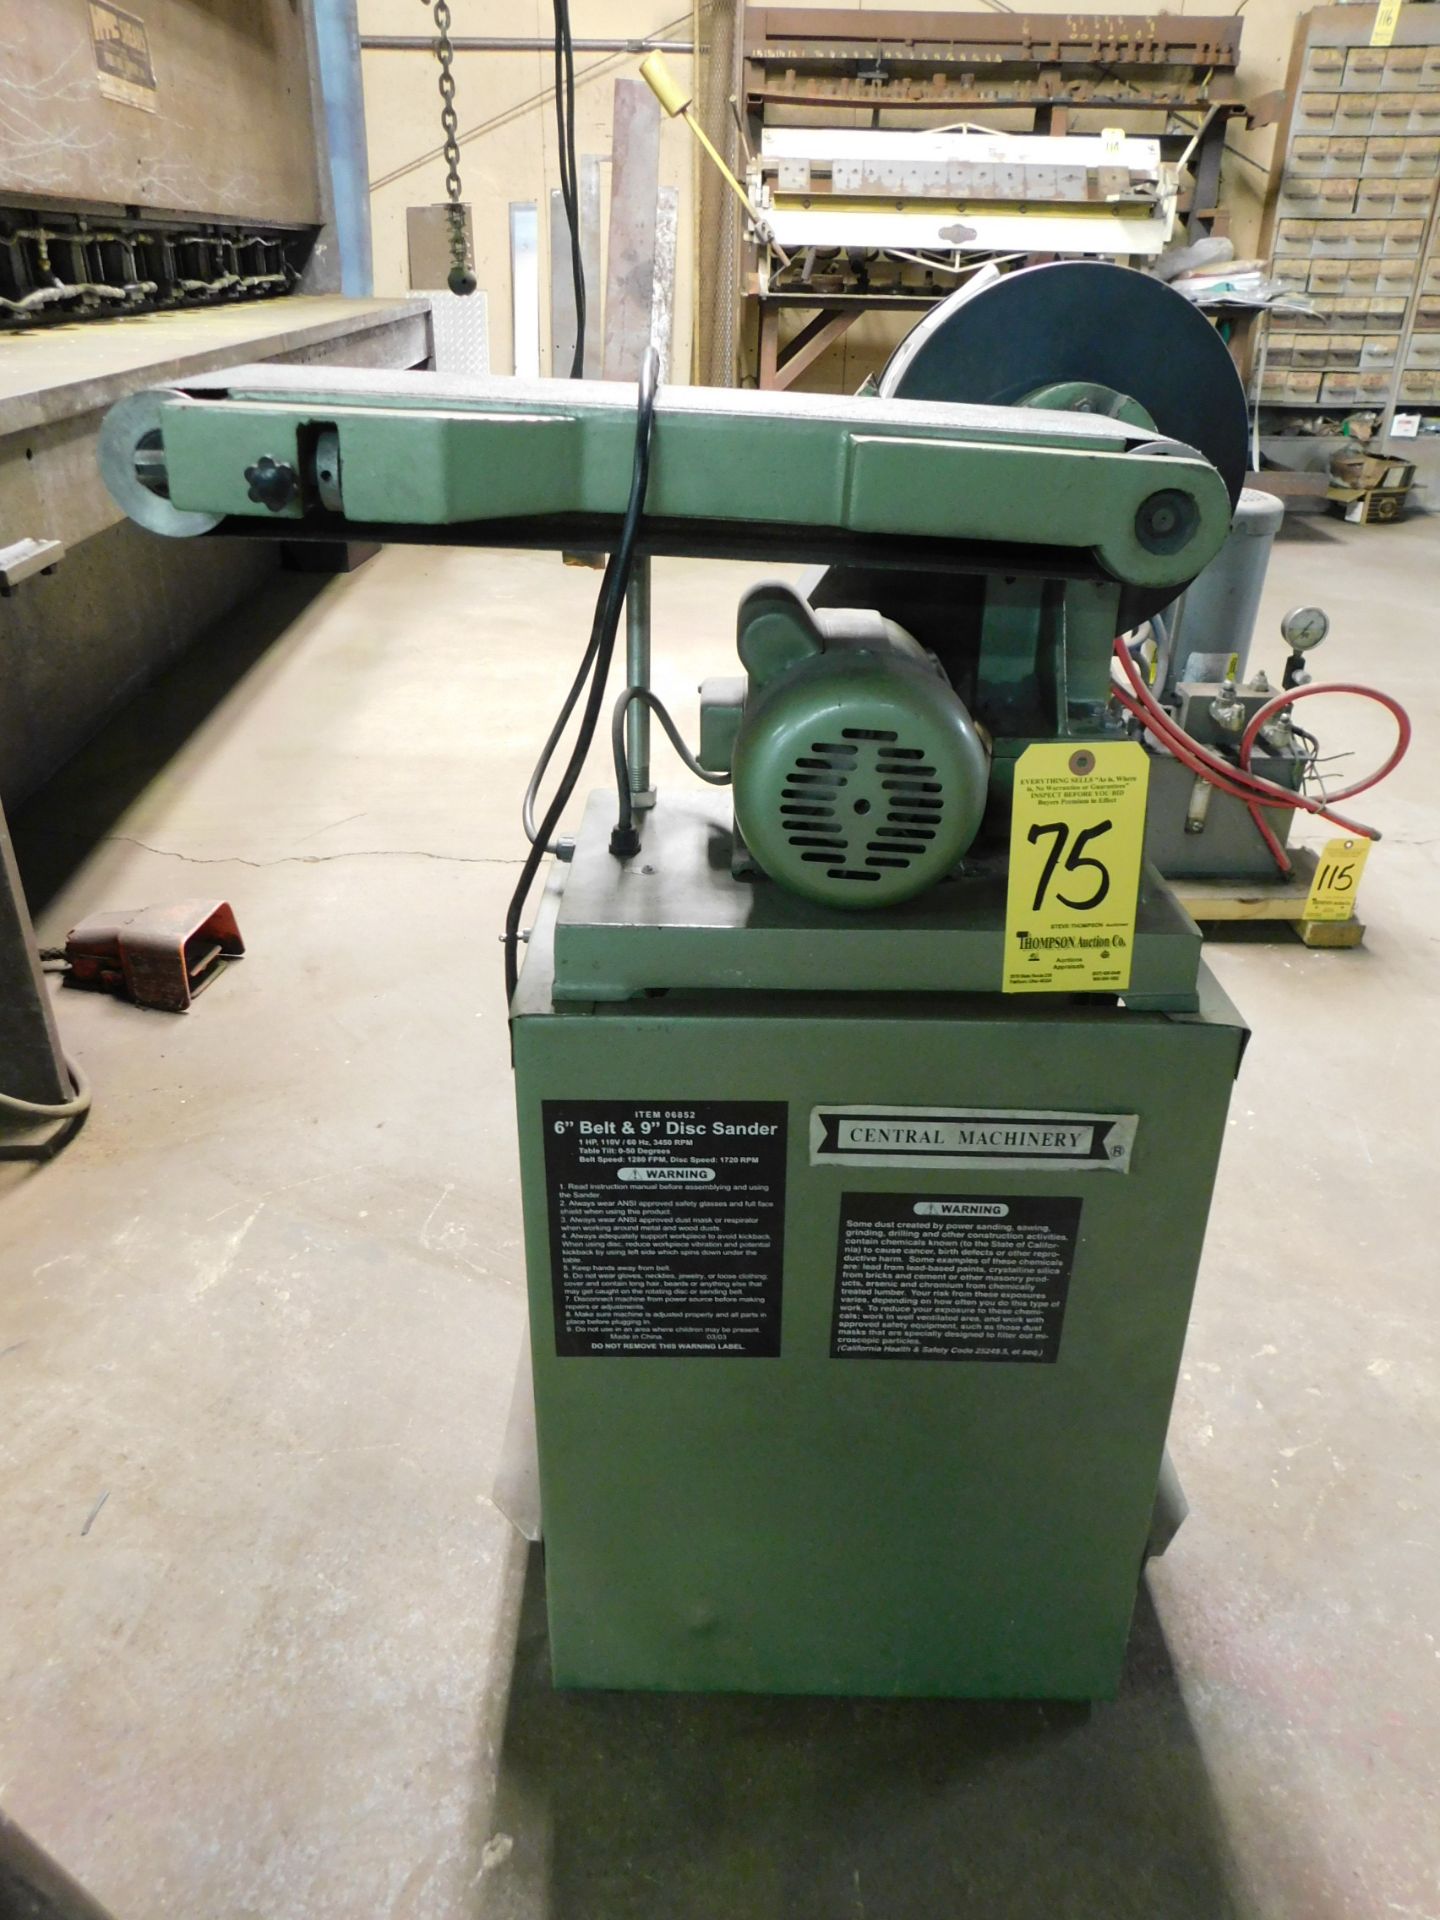 Central Machinery 6 In. Belt and 9 In. Disc Sander, 110/1/60 AC Electrics, Disc Sander Missing